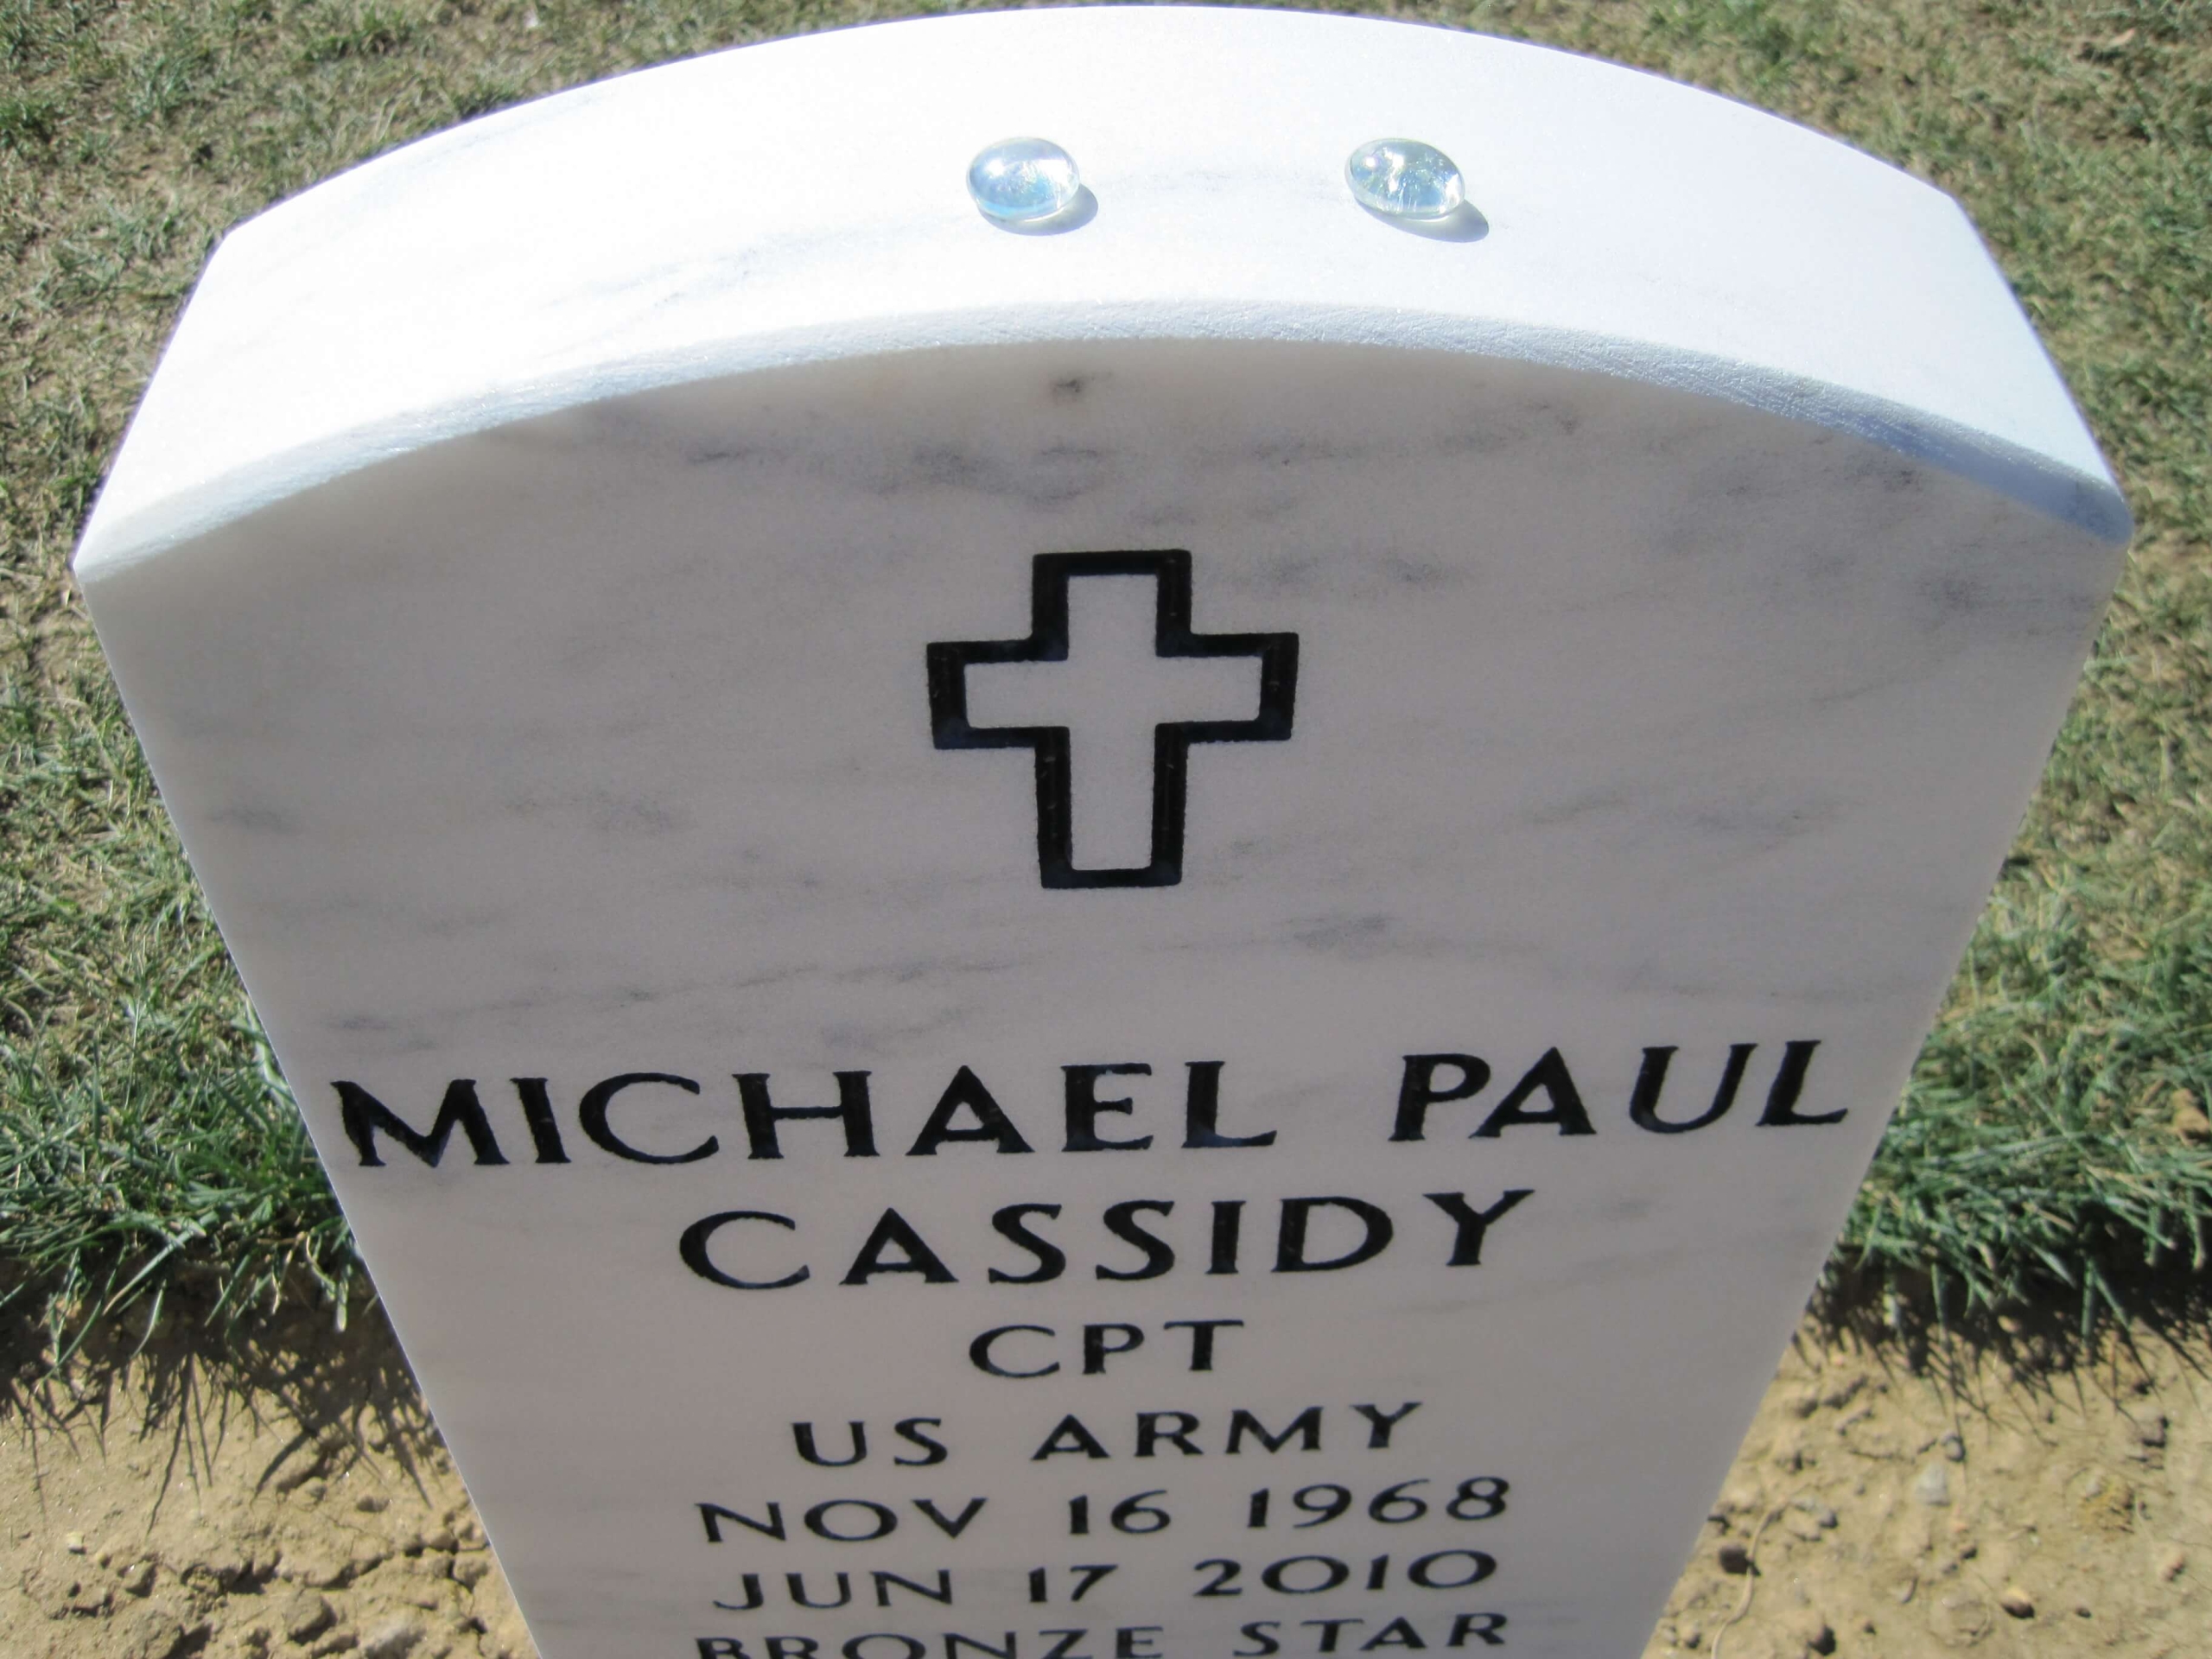 mpcassidy-gravesite-photo-by-eileen-horan-september-2010-002